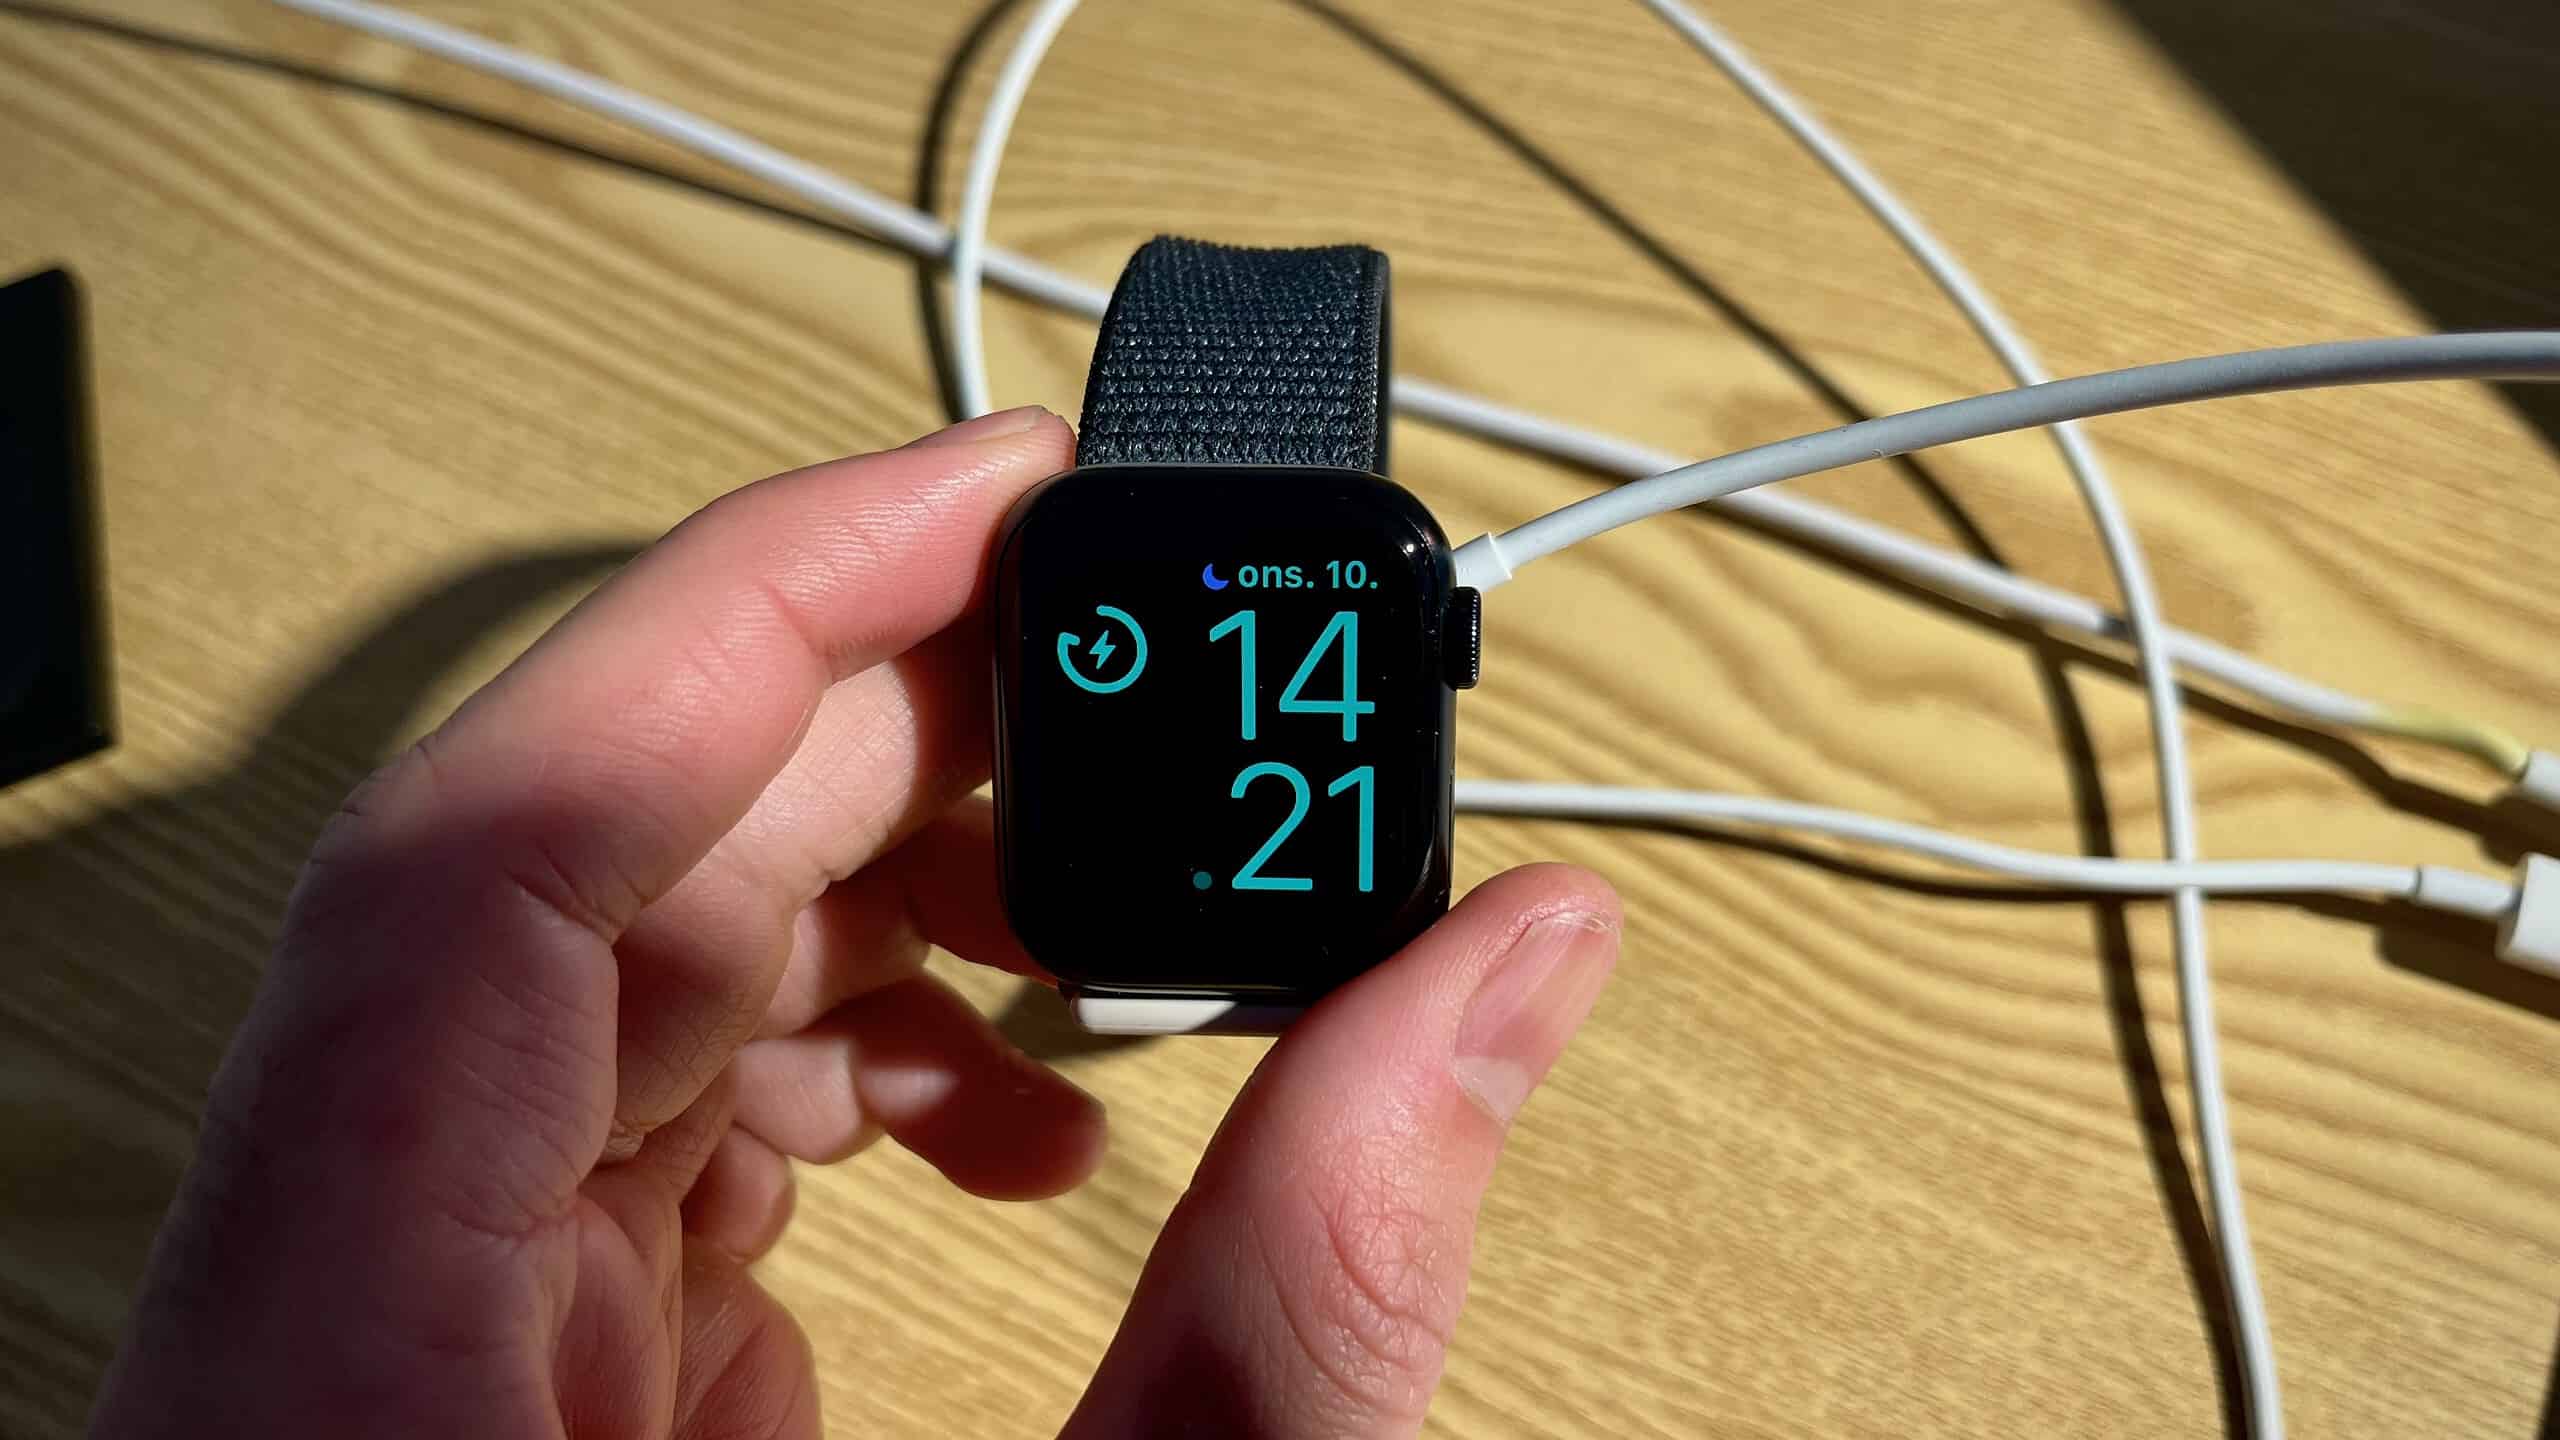 What an Apple Watch looks like when the screen is charging